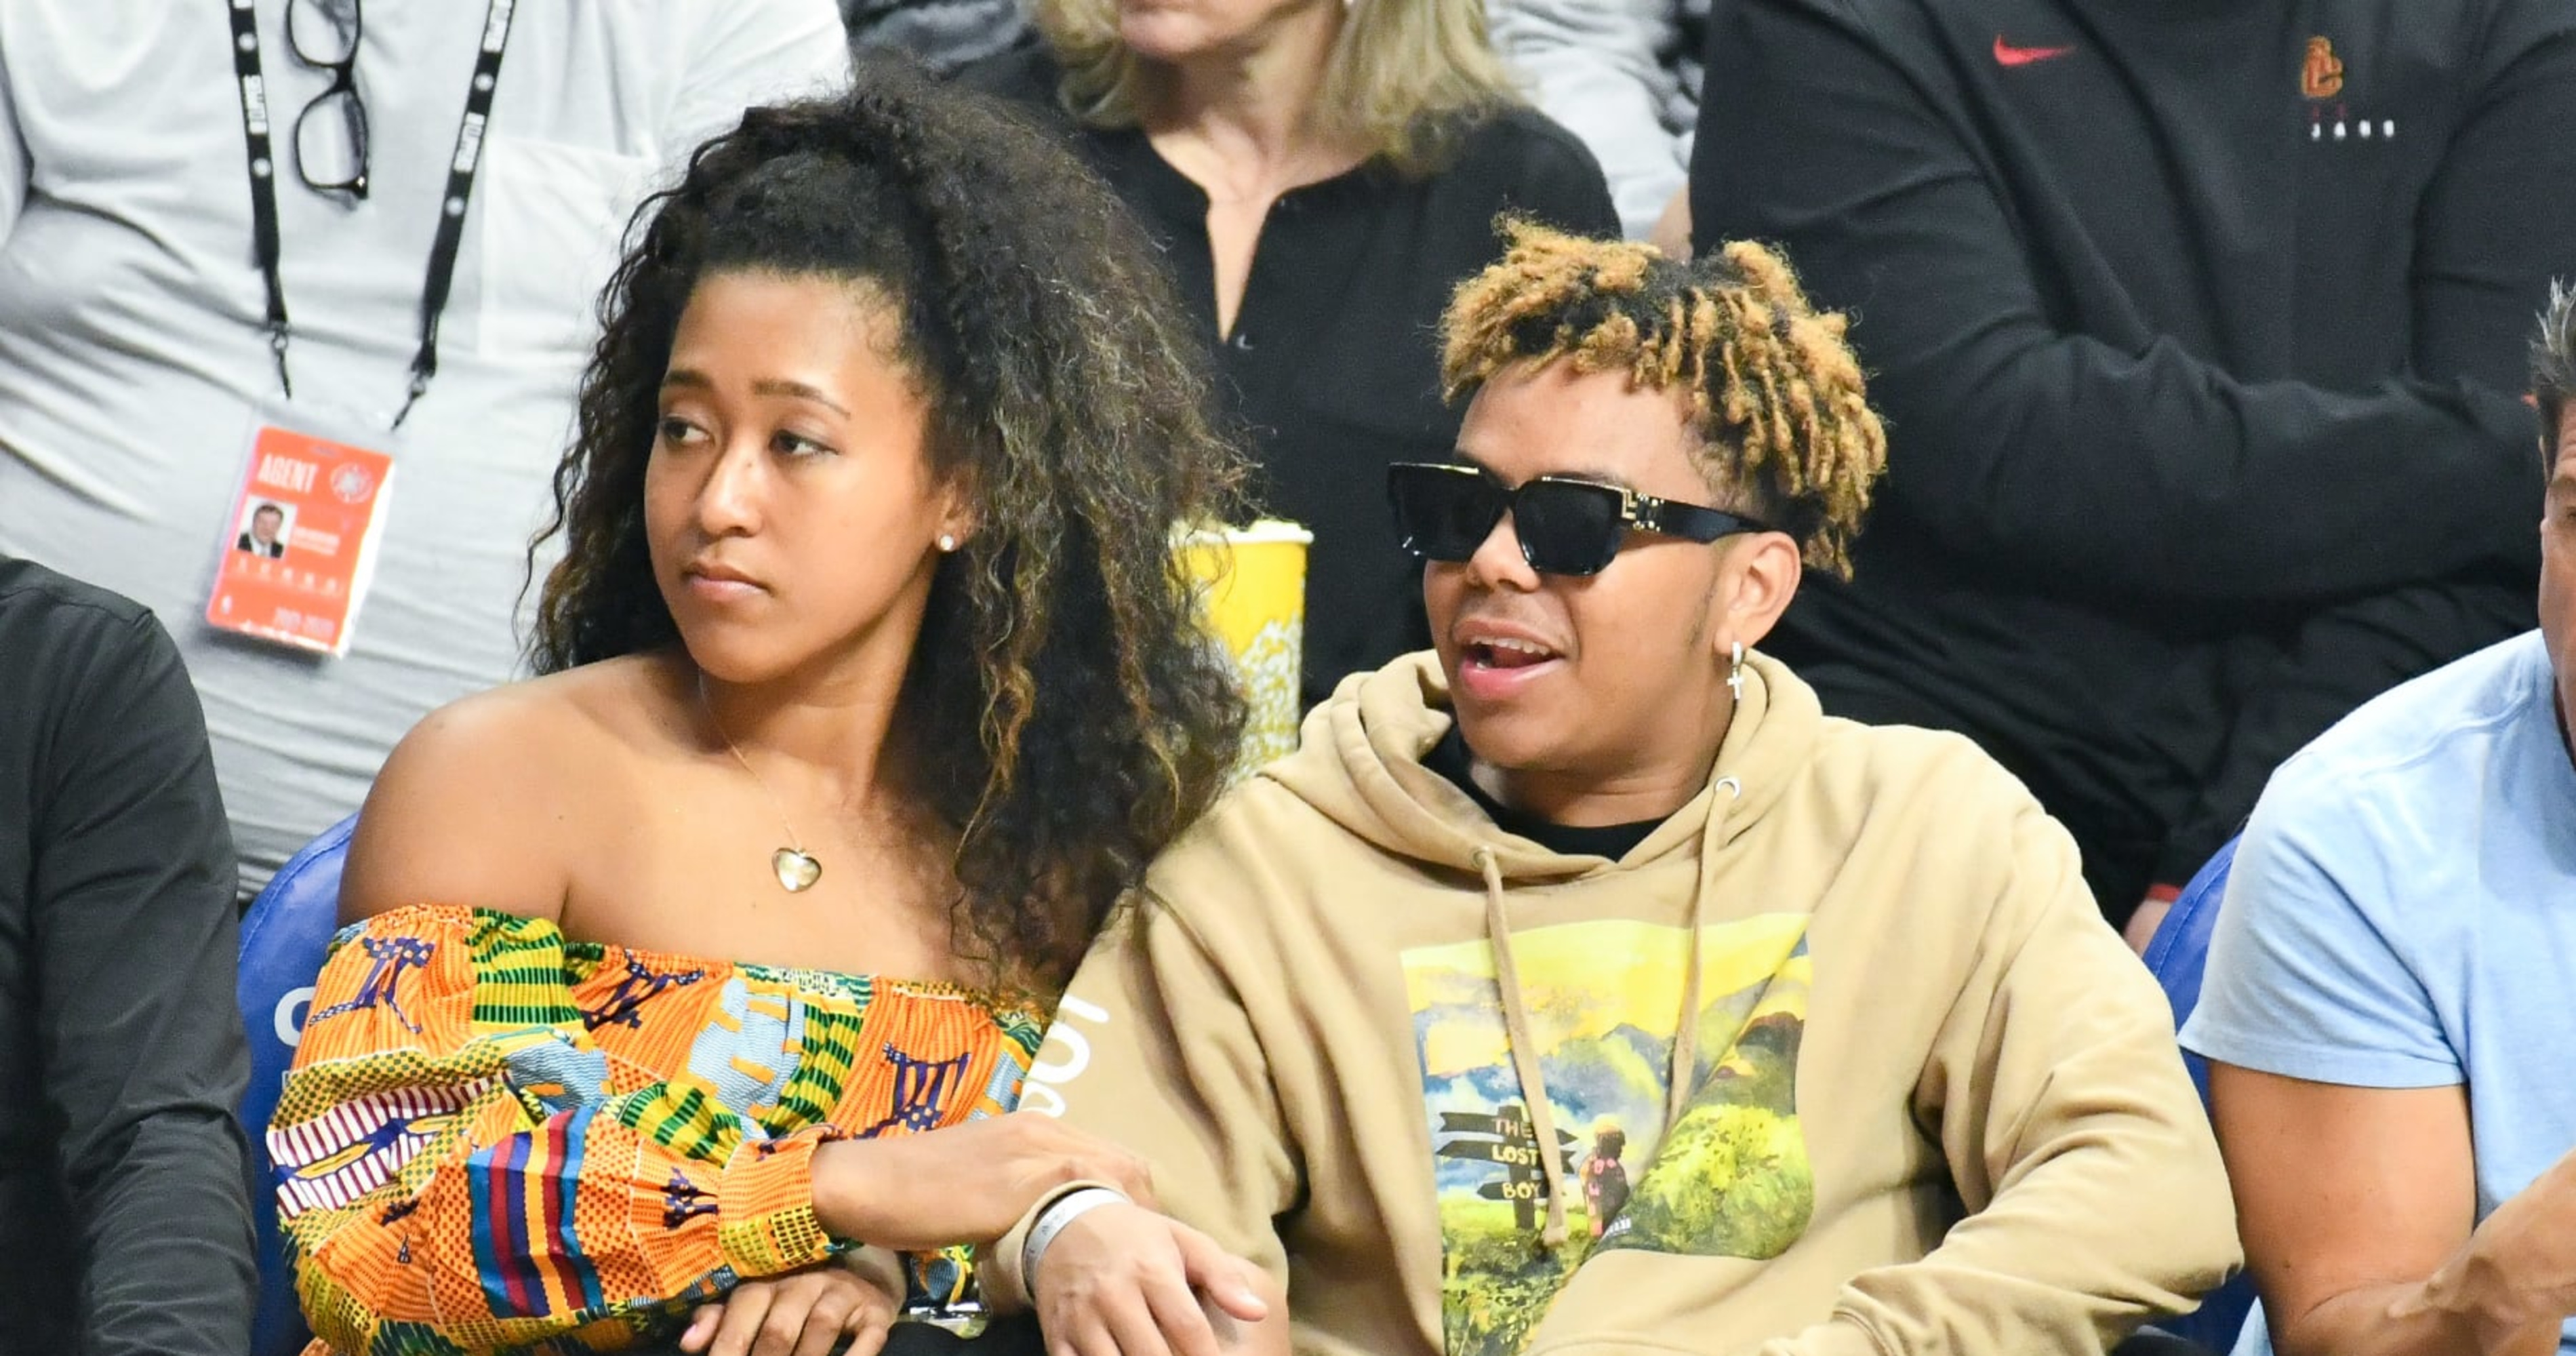 Tennis Superstar Naomi Osaka Expecting First Baby With Cordae